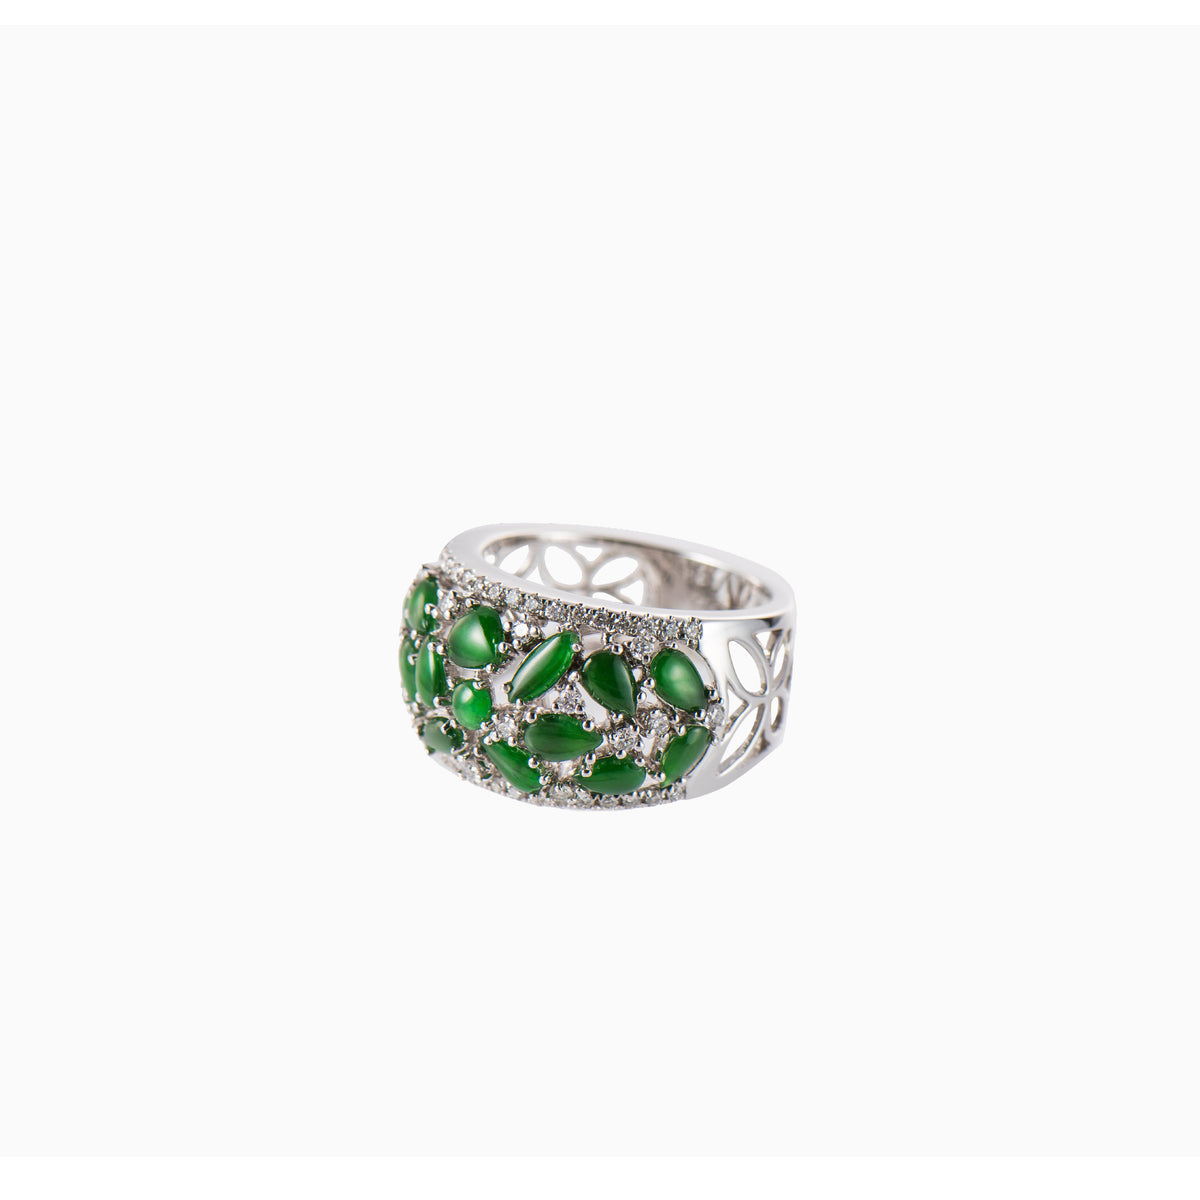 A stylish green jade ring called &quot;Starry Night&quot; with many diamonds